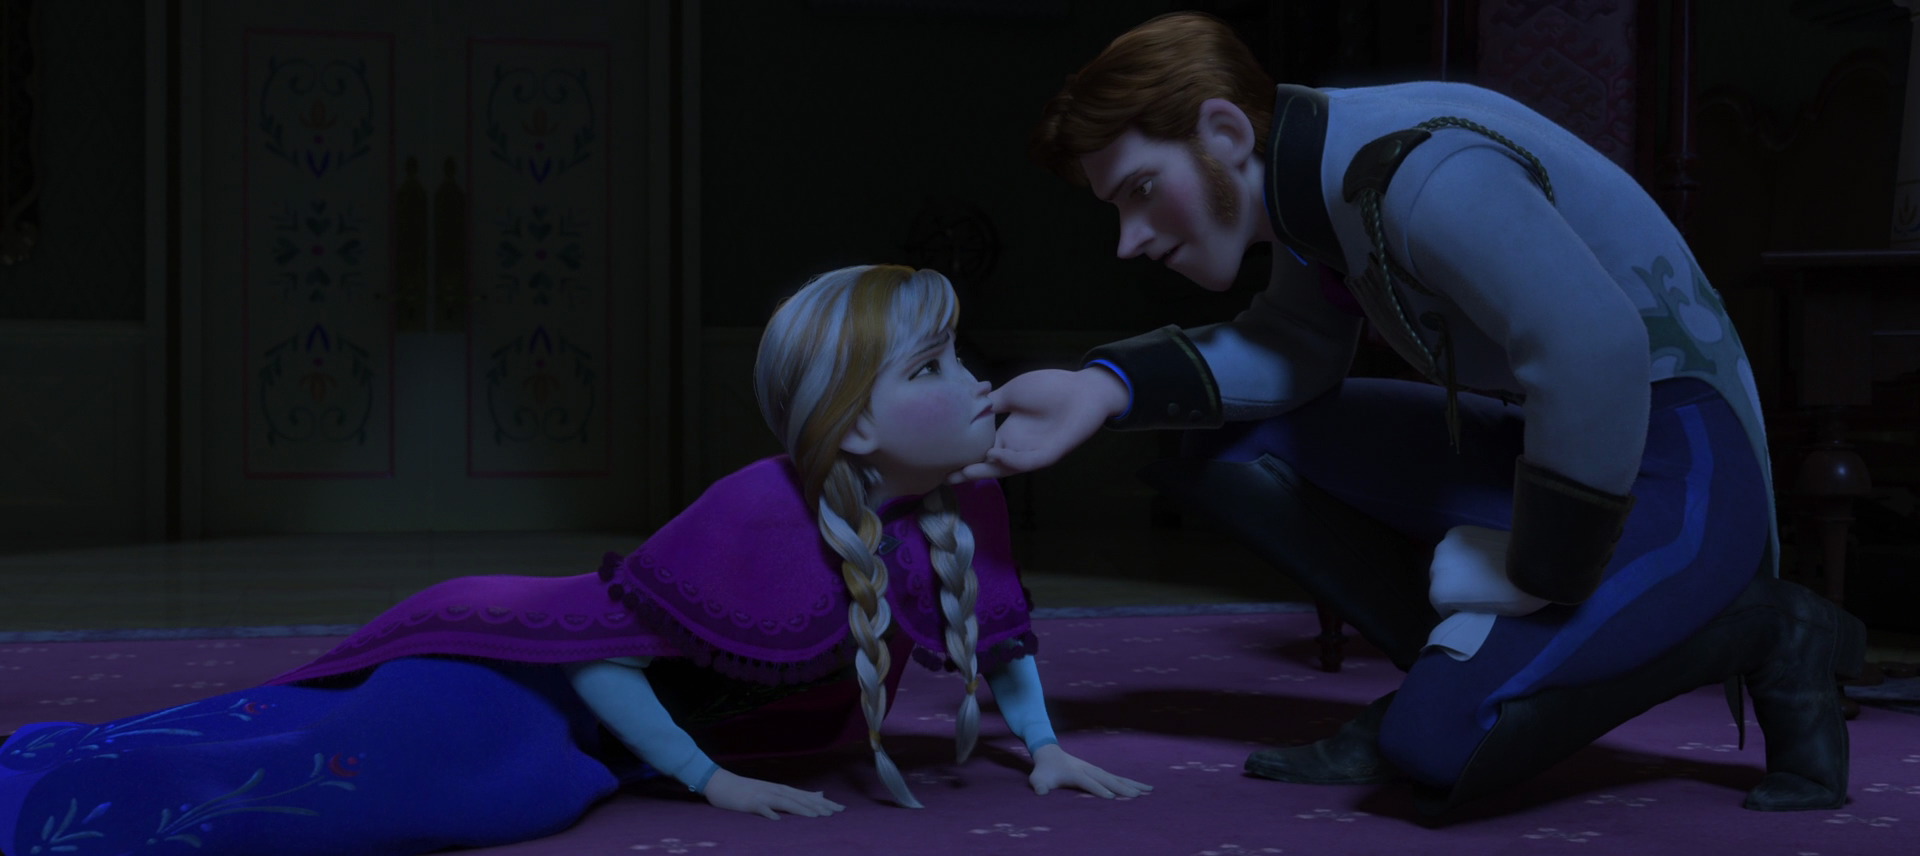 Frozen - Hans is a handsome royal from a neighboring kingdom who comes to  Arendelle for Elsa's coronation. With 12 older brothers, Hans grew up  feeling practically invisible—and Anna can relate. Hans